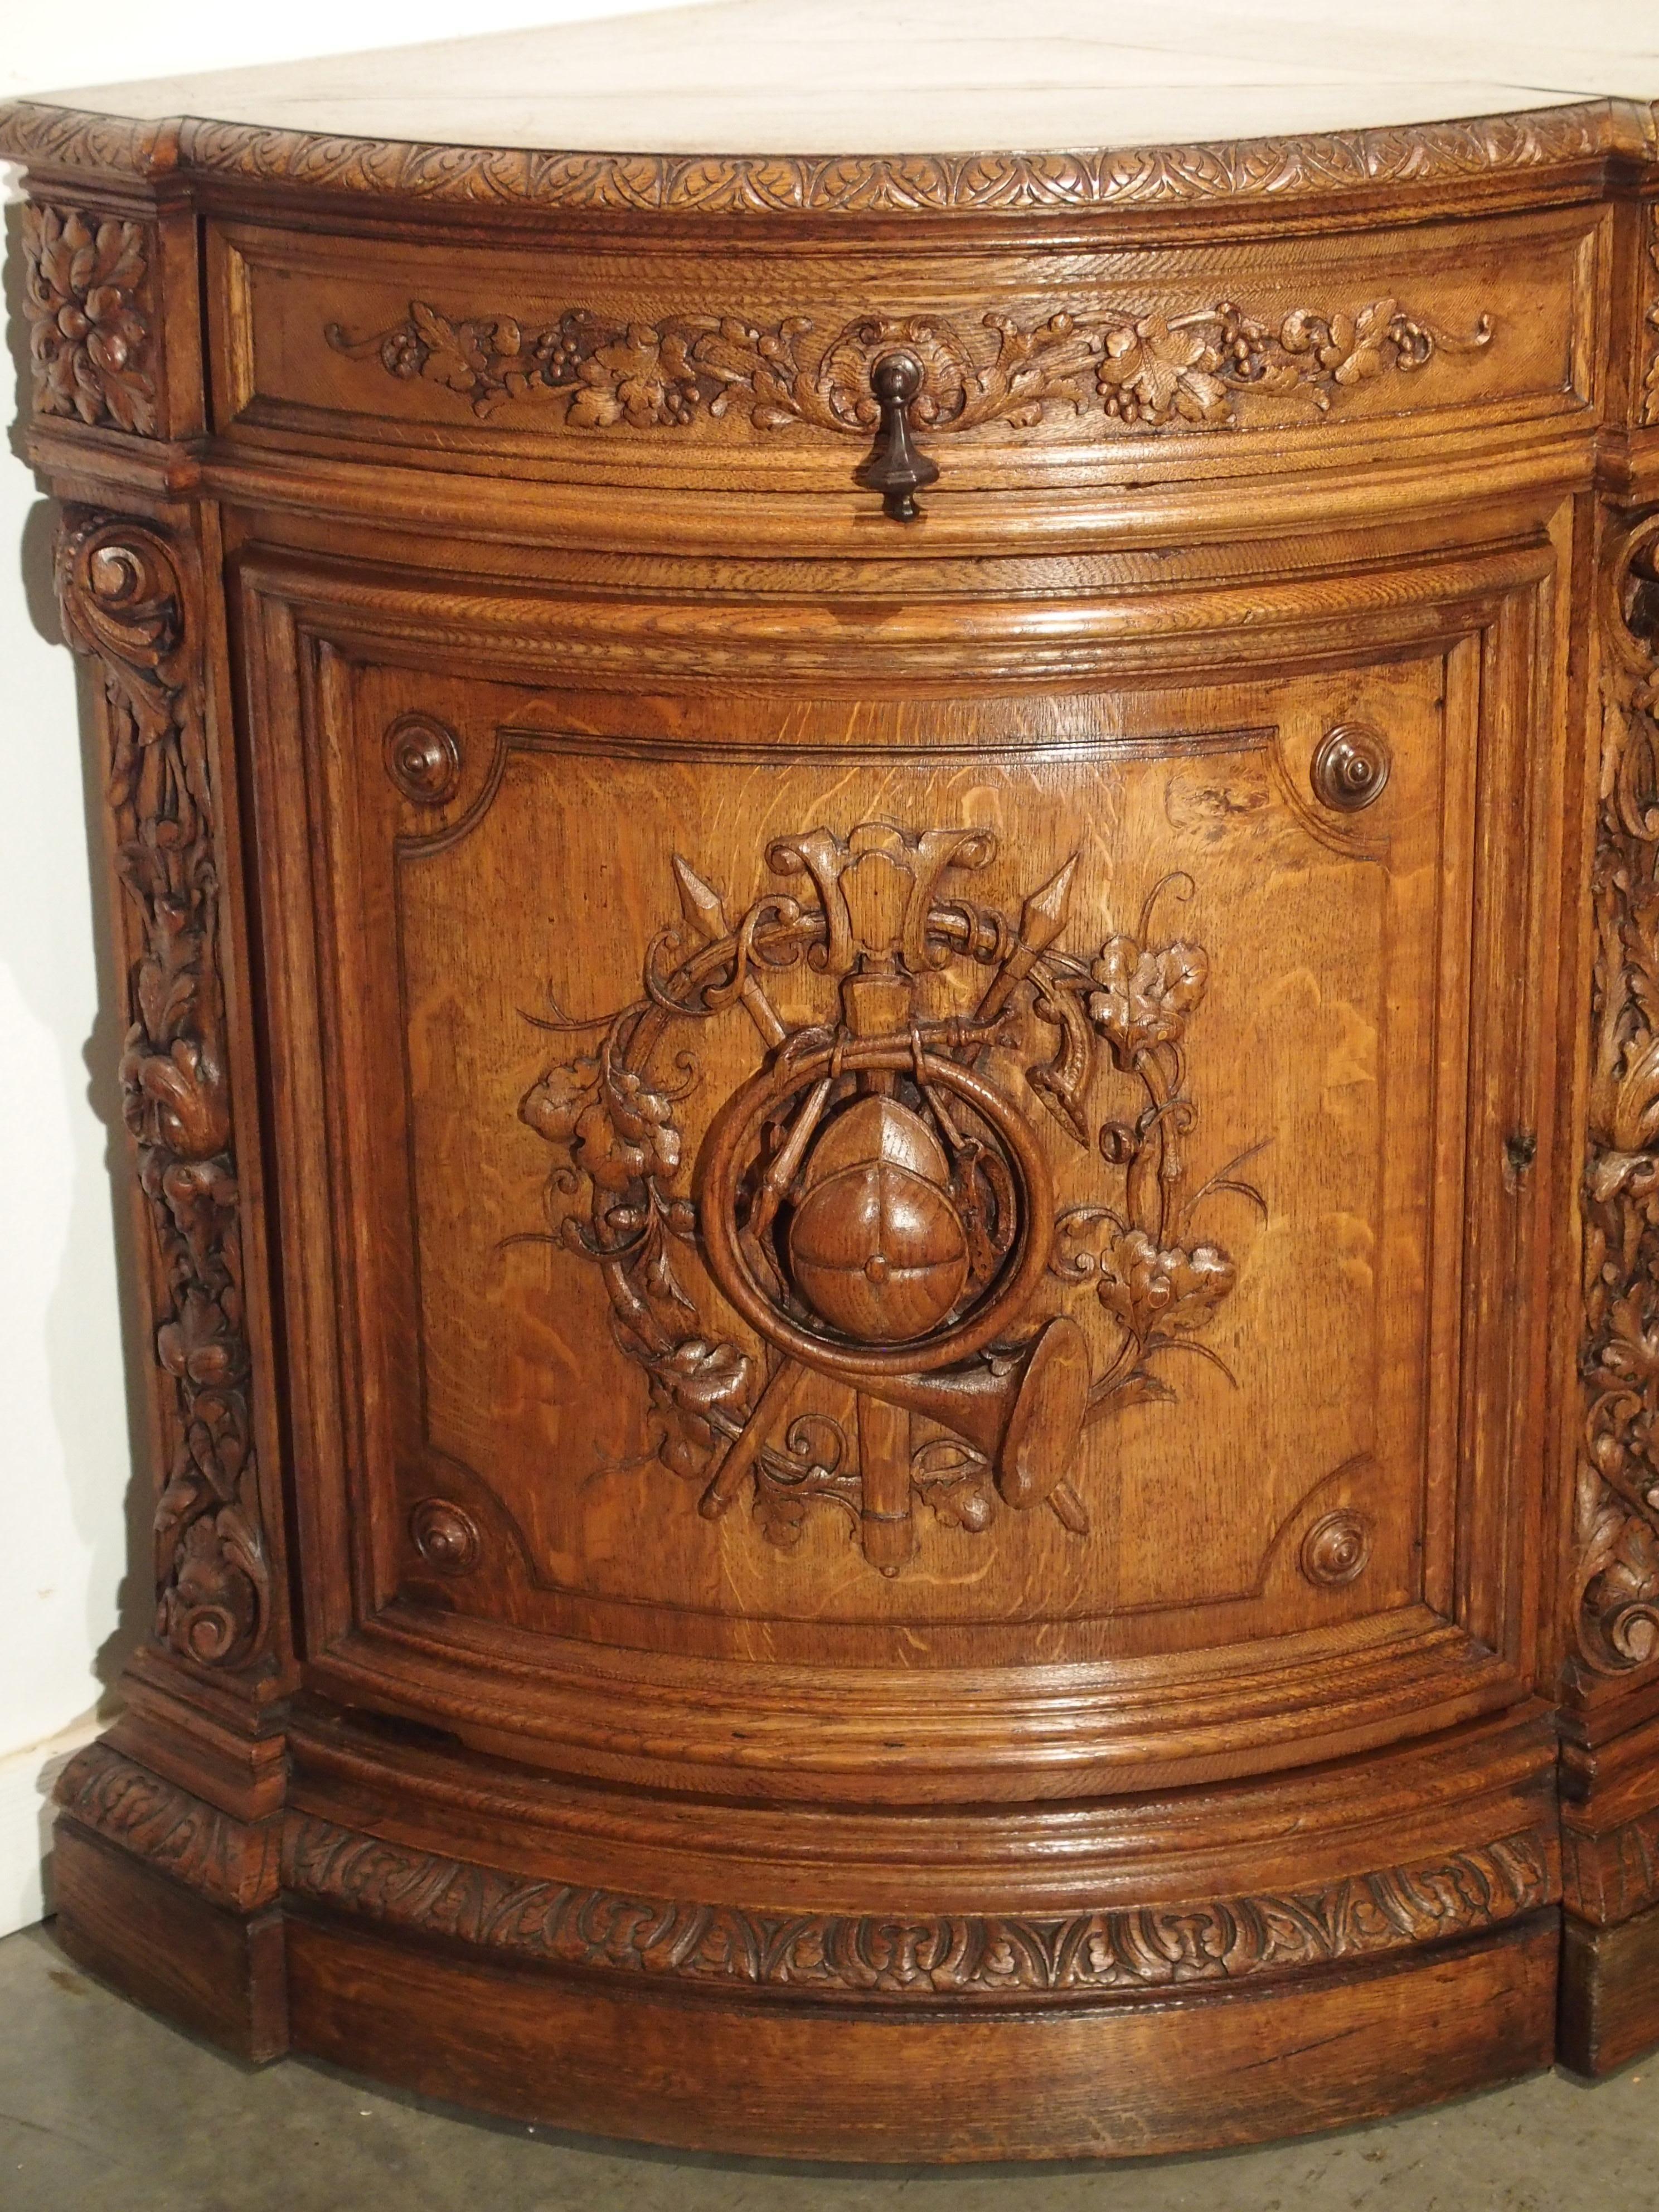 From France, this exceptional, hand carved hunt buffet with curved ends, depicts extraordinarily large versions of beautiful animals. They are featured on the two front cabinet doors. Both doors depict a fox or wolf in shrubbery seeking their prey;